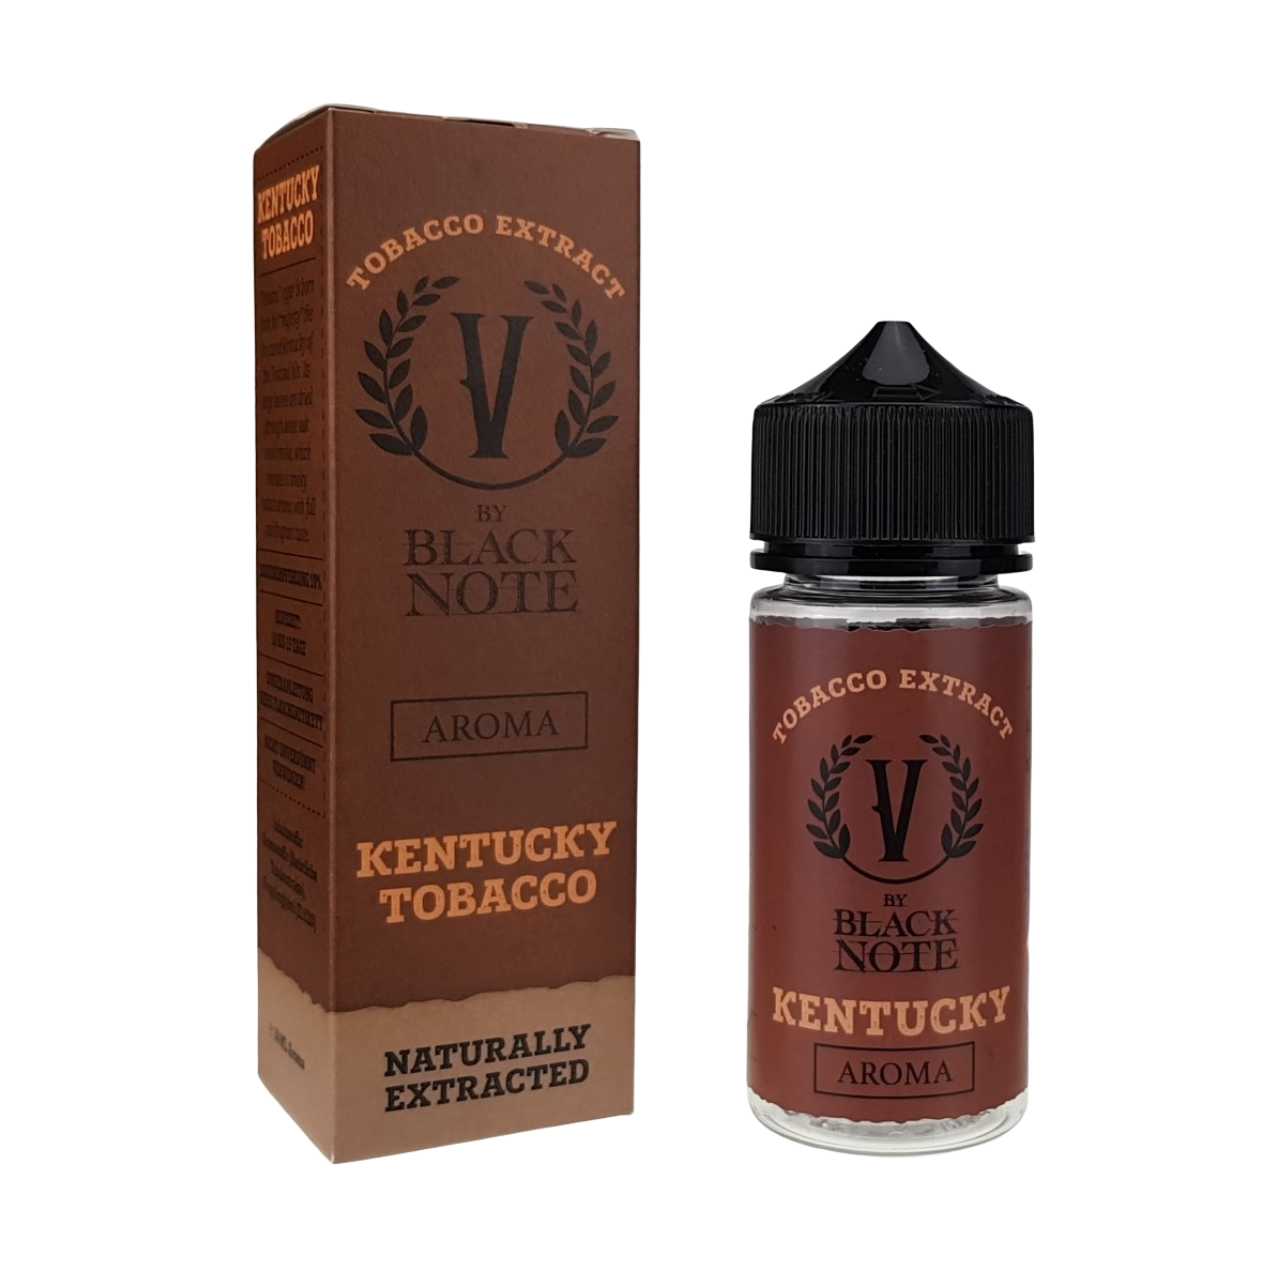 V by Black Note Kentucky Tobacco Aroma Longfill